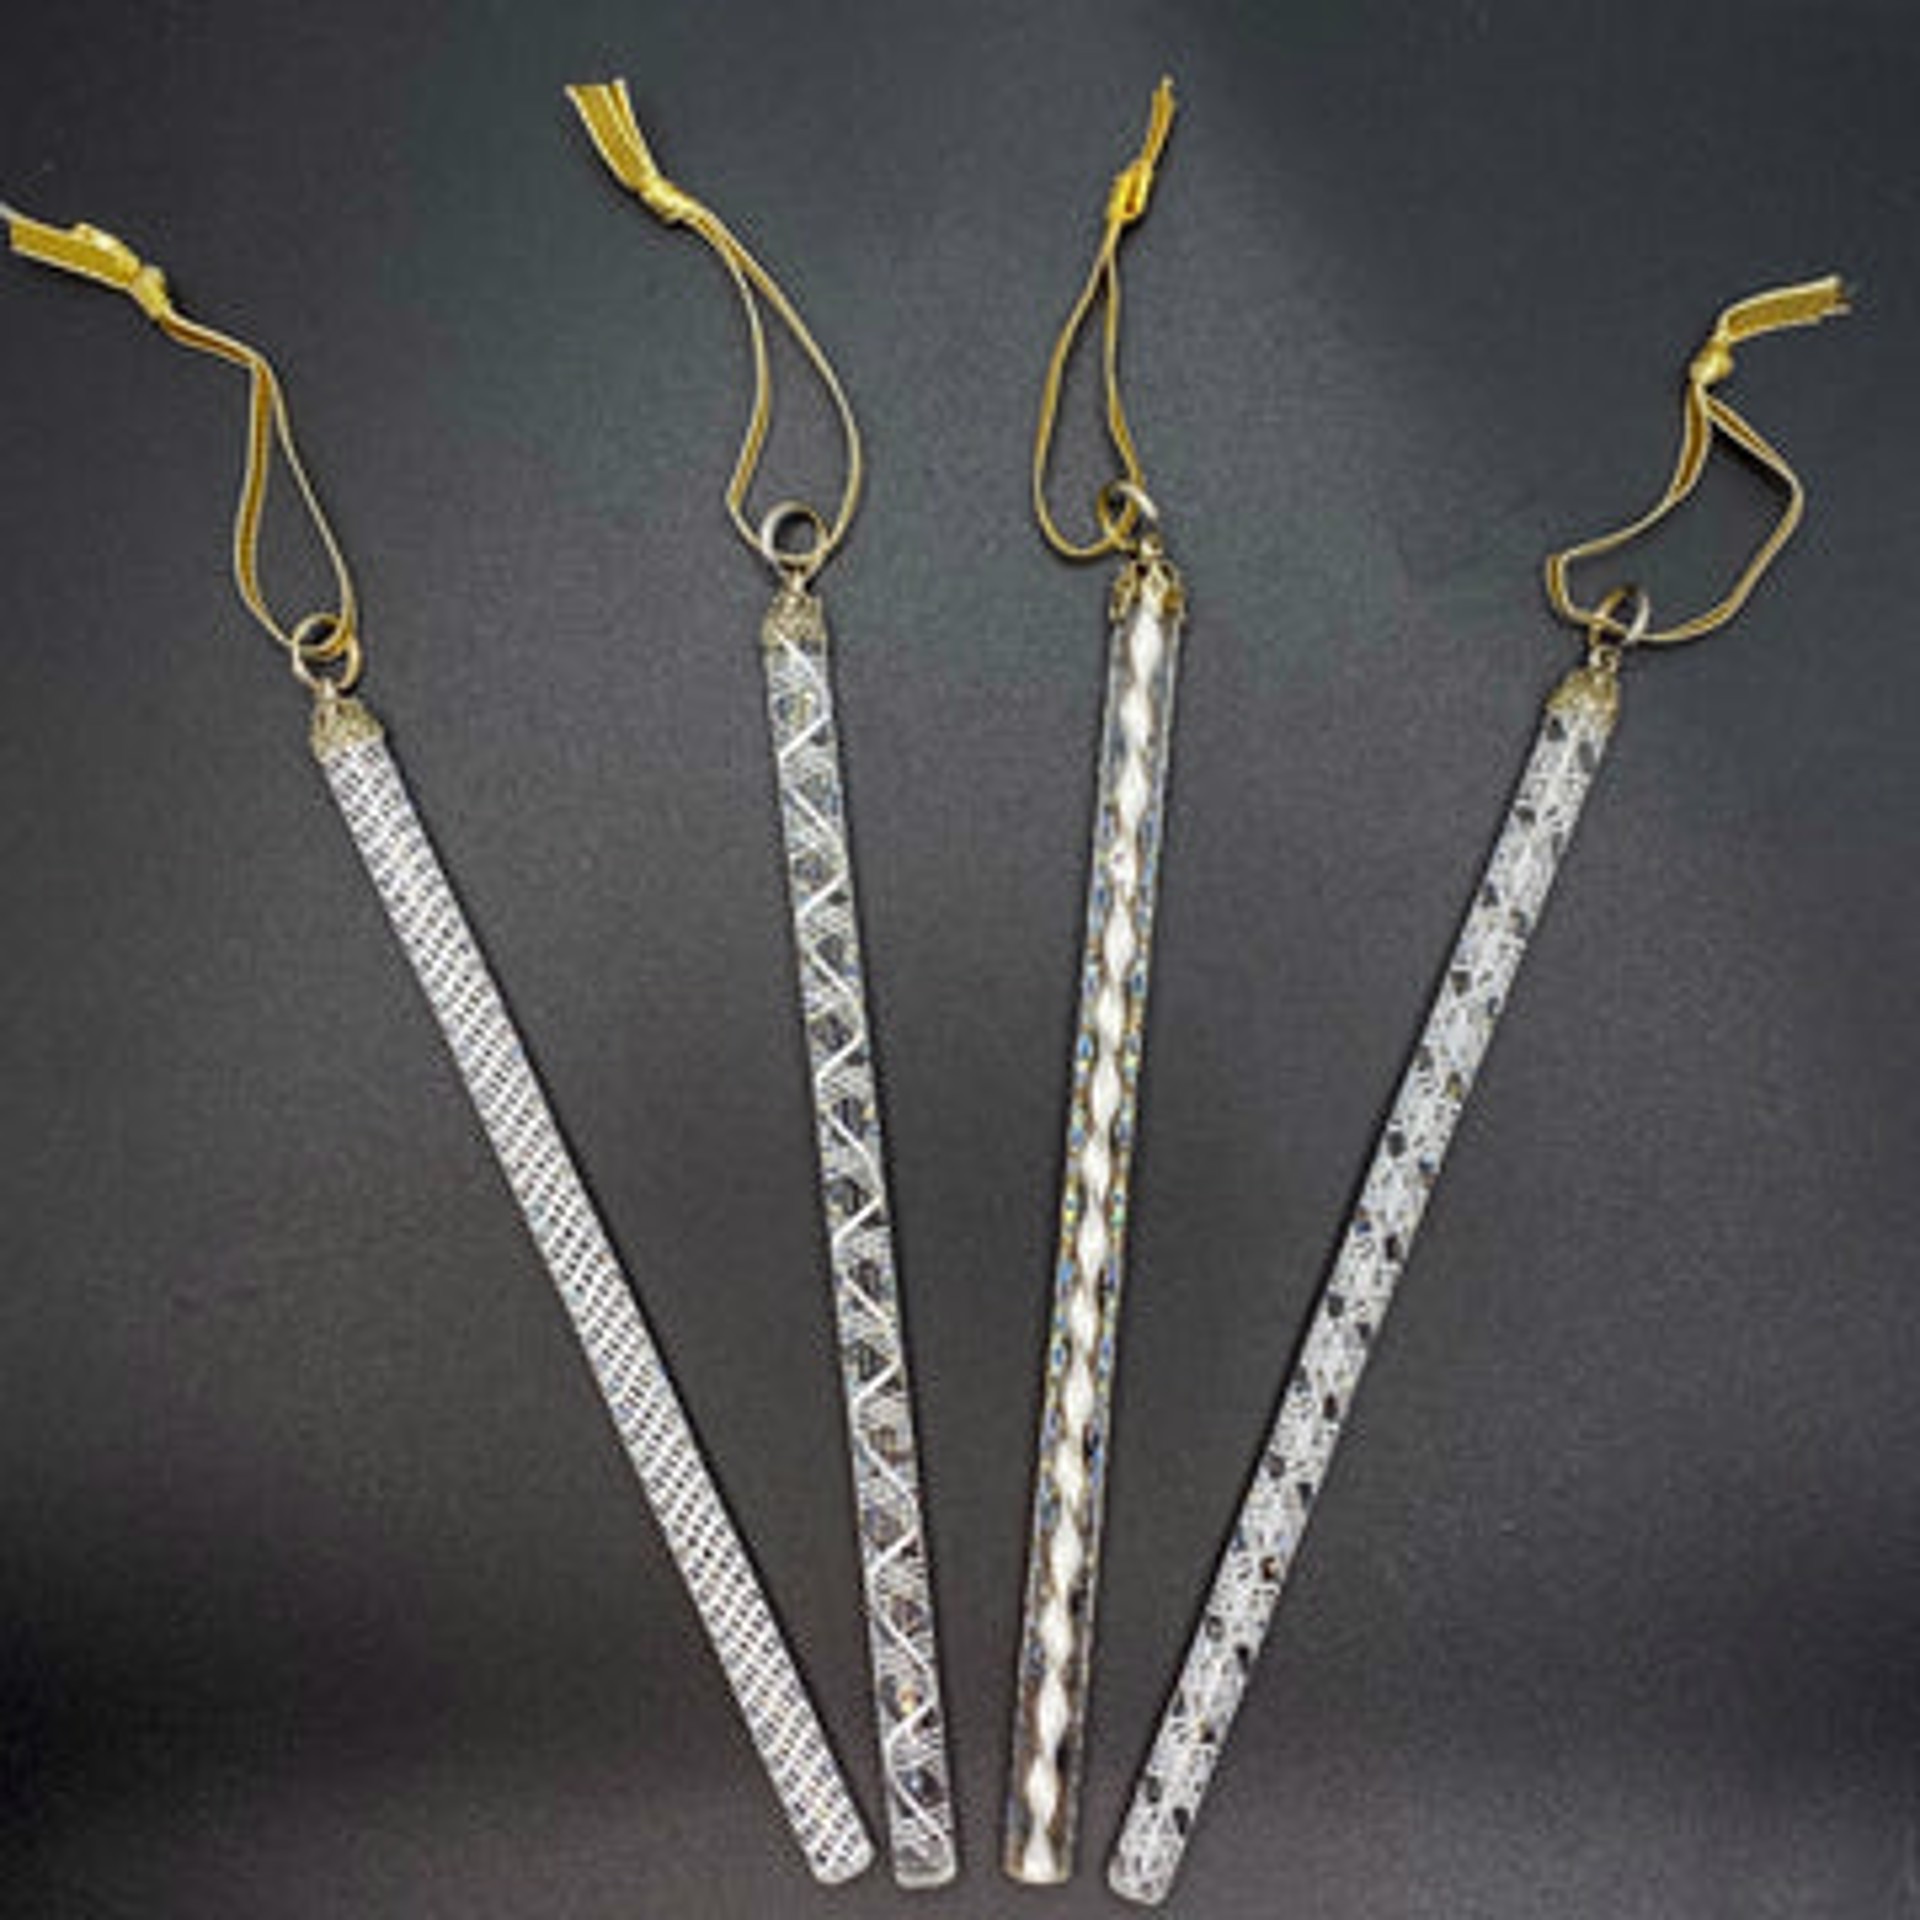 Art Glass Icicles -  White Filigree Mix  (boxed set of 4) 202993 by Virginia Wilson Toccalino